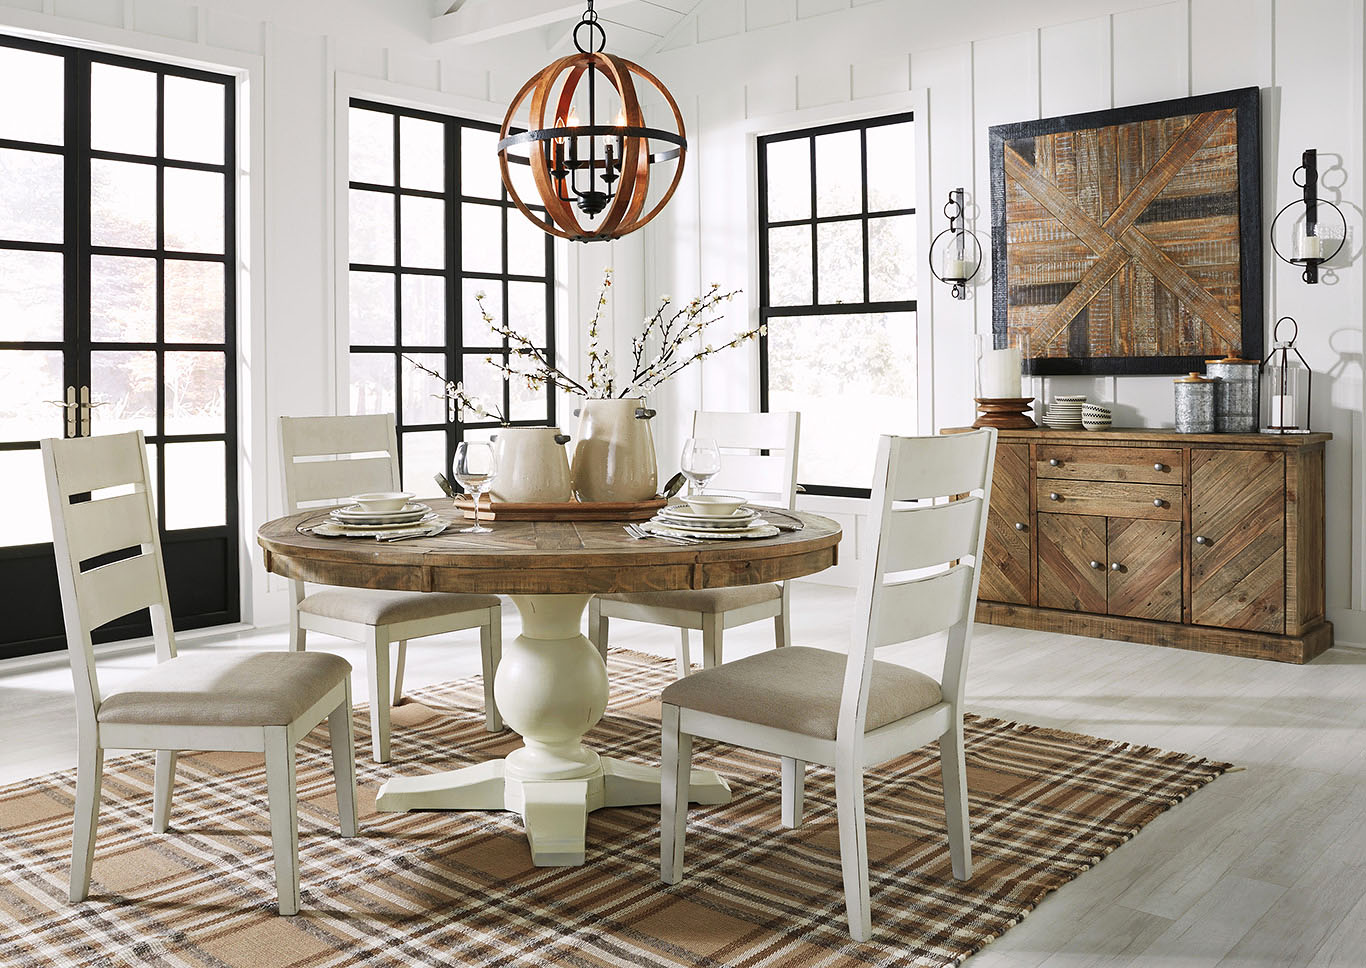 Woodstock Furniture Value Center Grindleburg Round Dining Table W